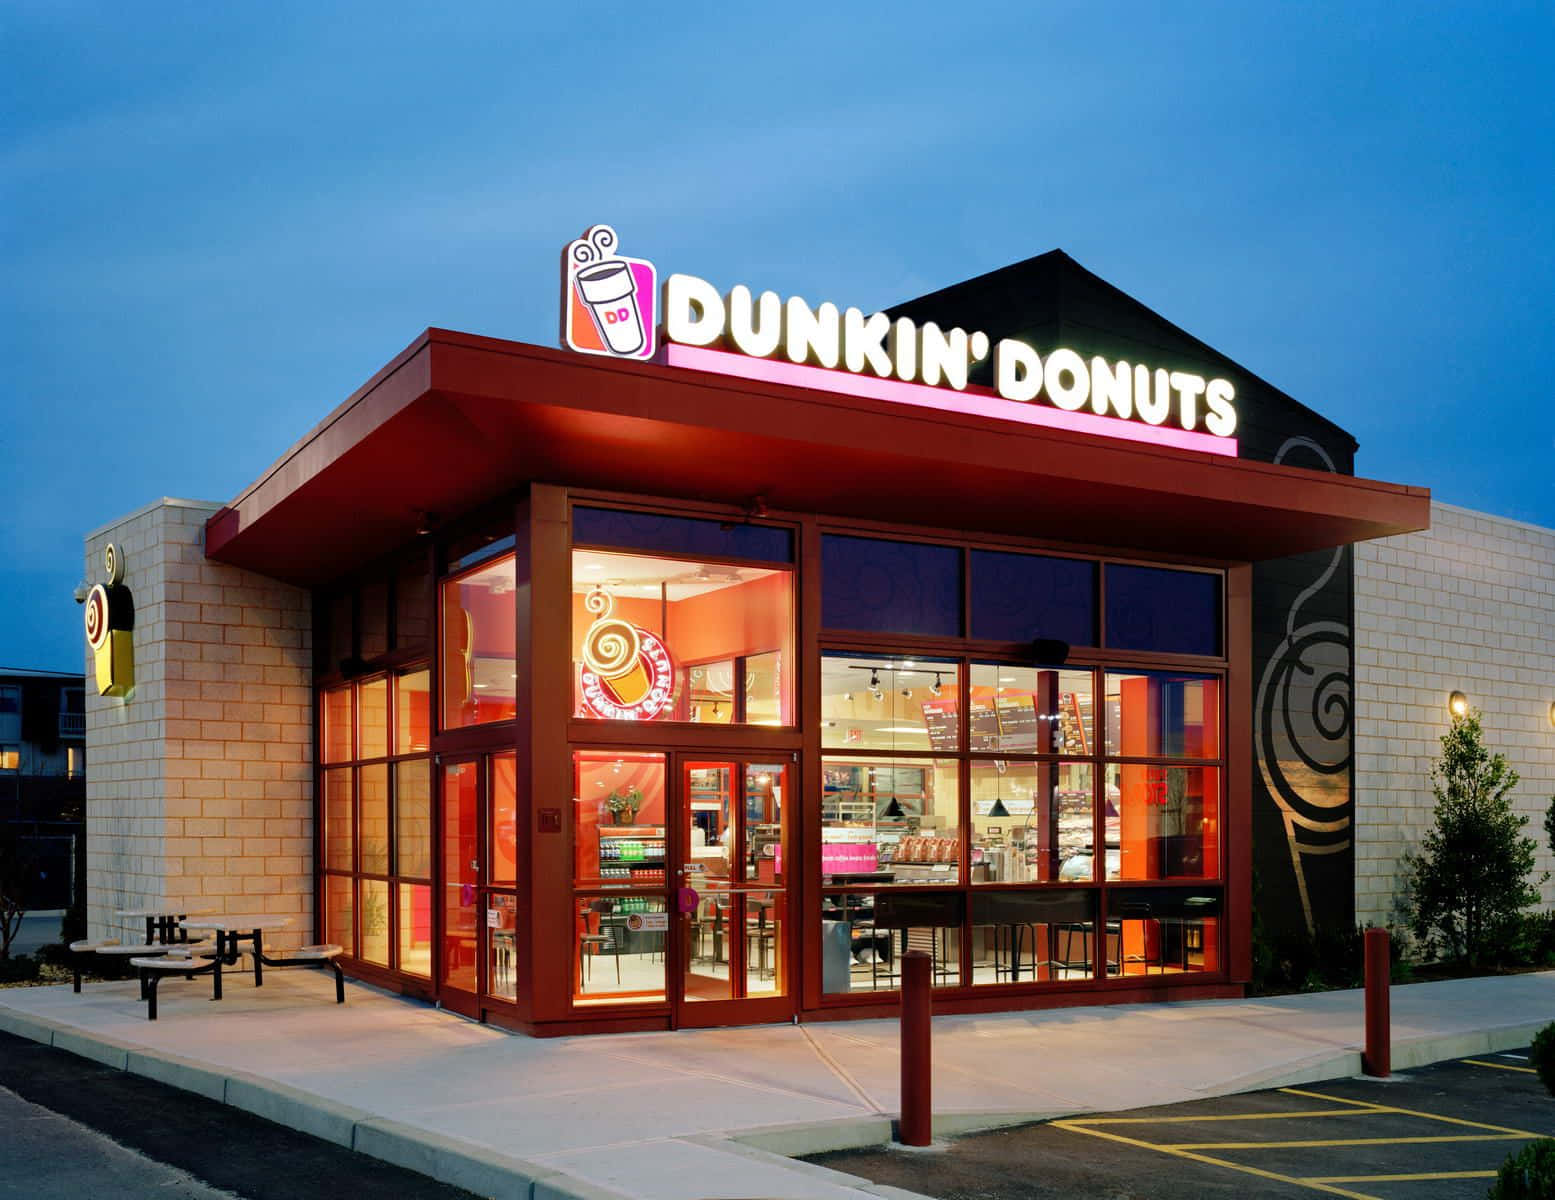 Enjoy your favorite Dunkin' coffee and donut!